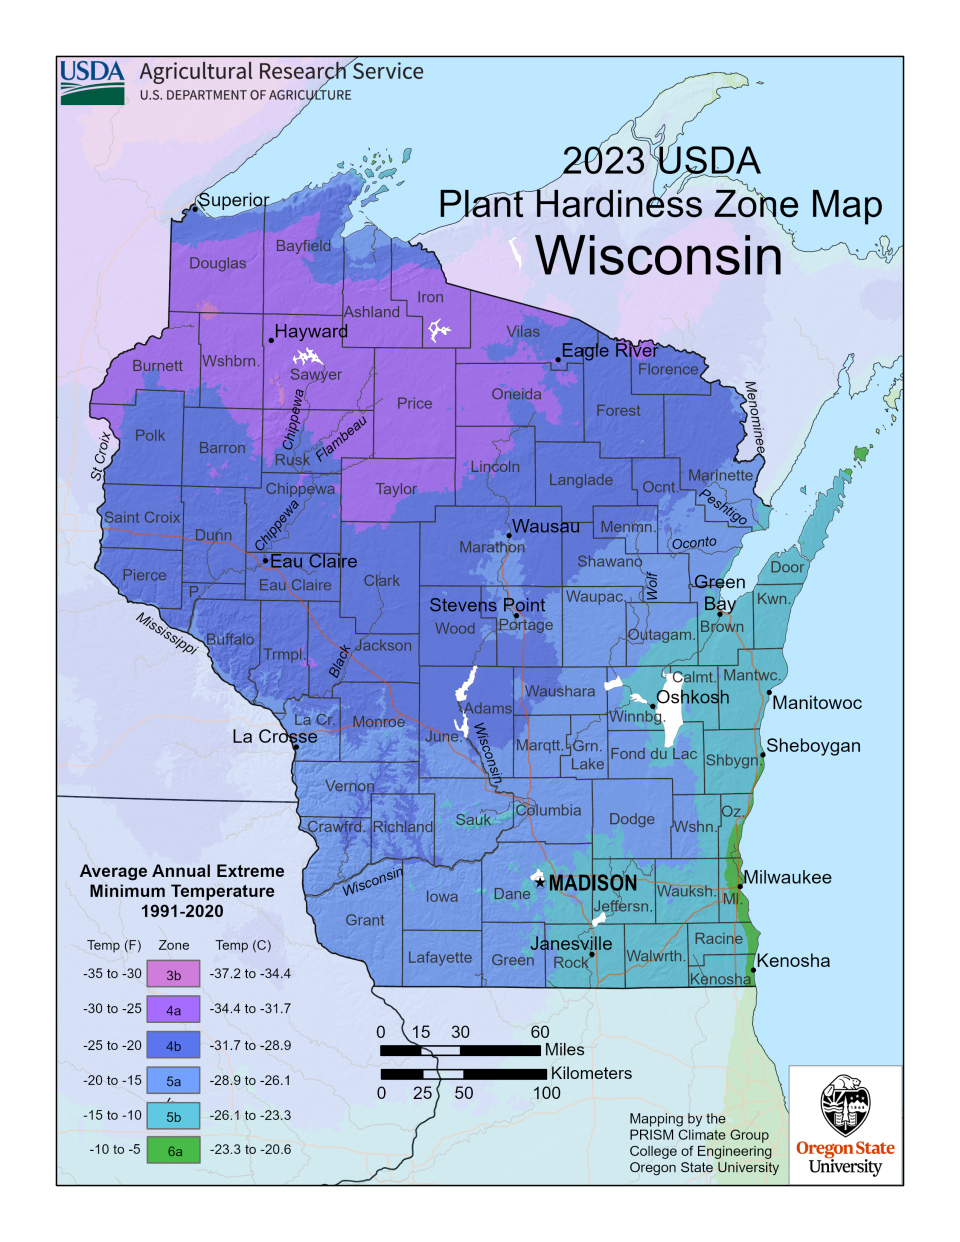 In November, the U.S. Department of Agriculture released an updated Plant Hardiness Zone Map, which is the standard by which gardeners and growers can determine which perennial plants are most likely to thrive at a location.